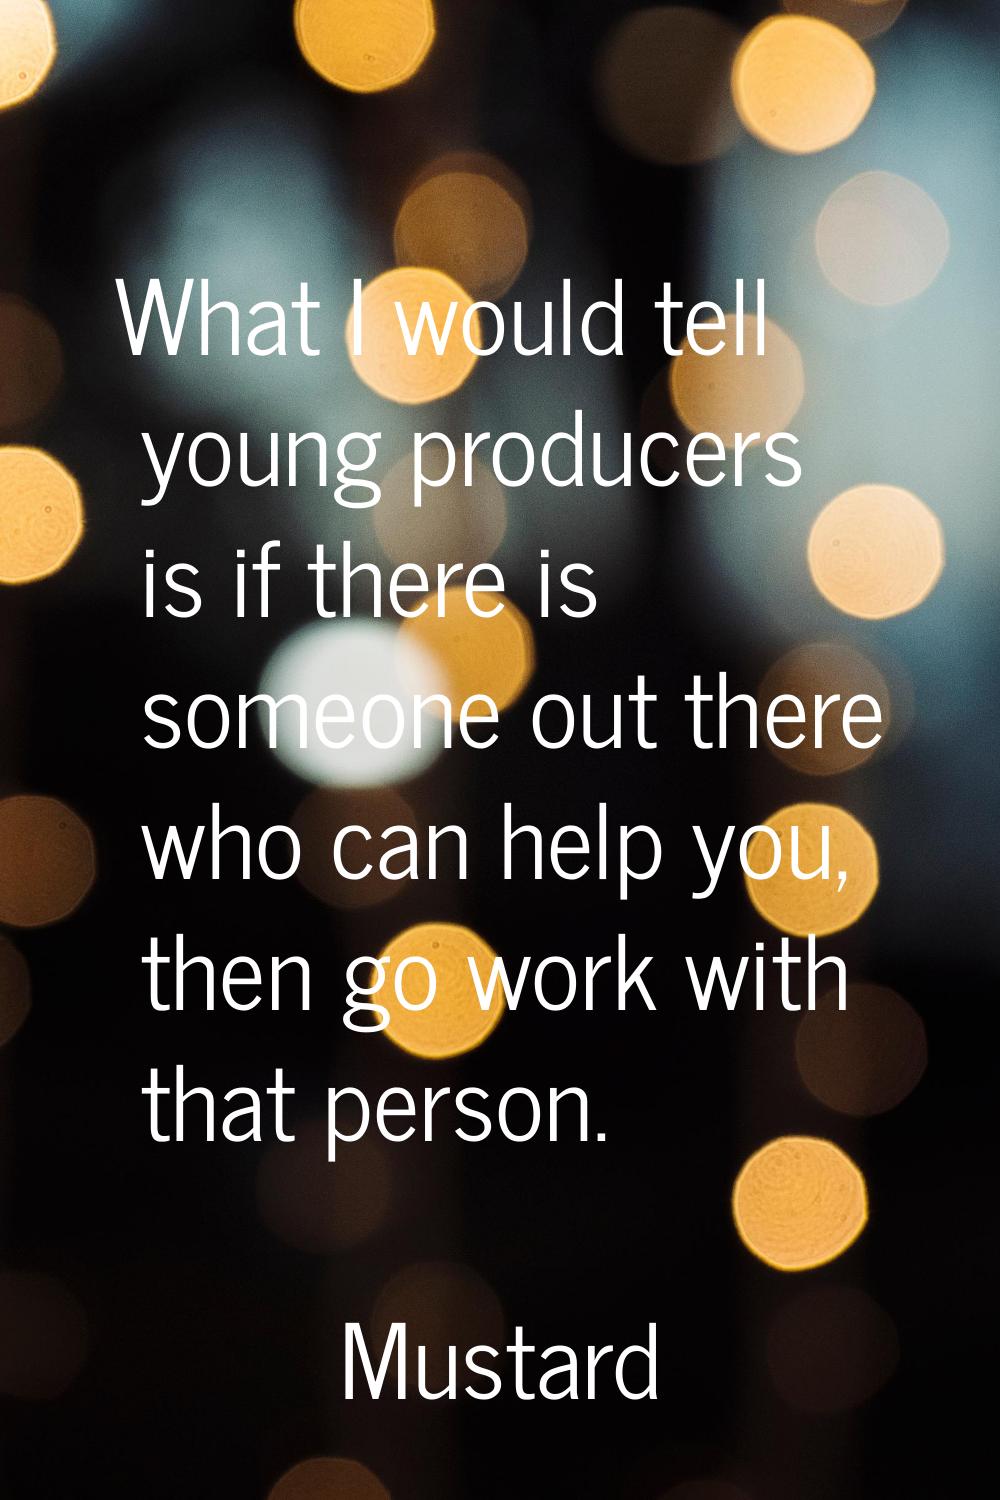 What I would tell young producers is if there is someone out there who can help you, then go work w